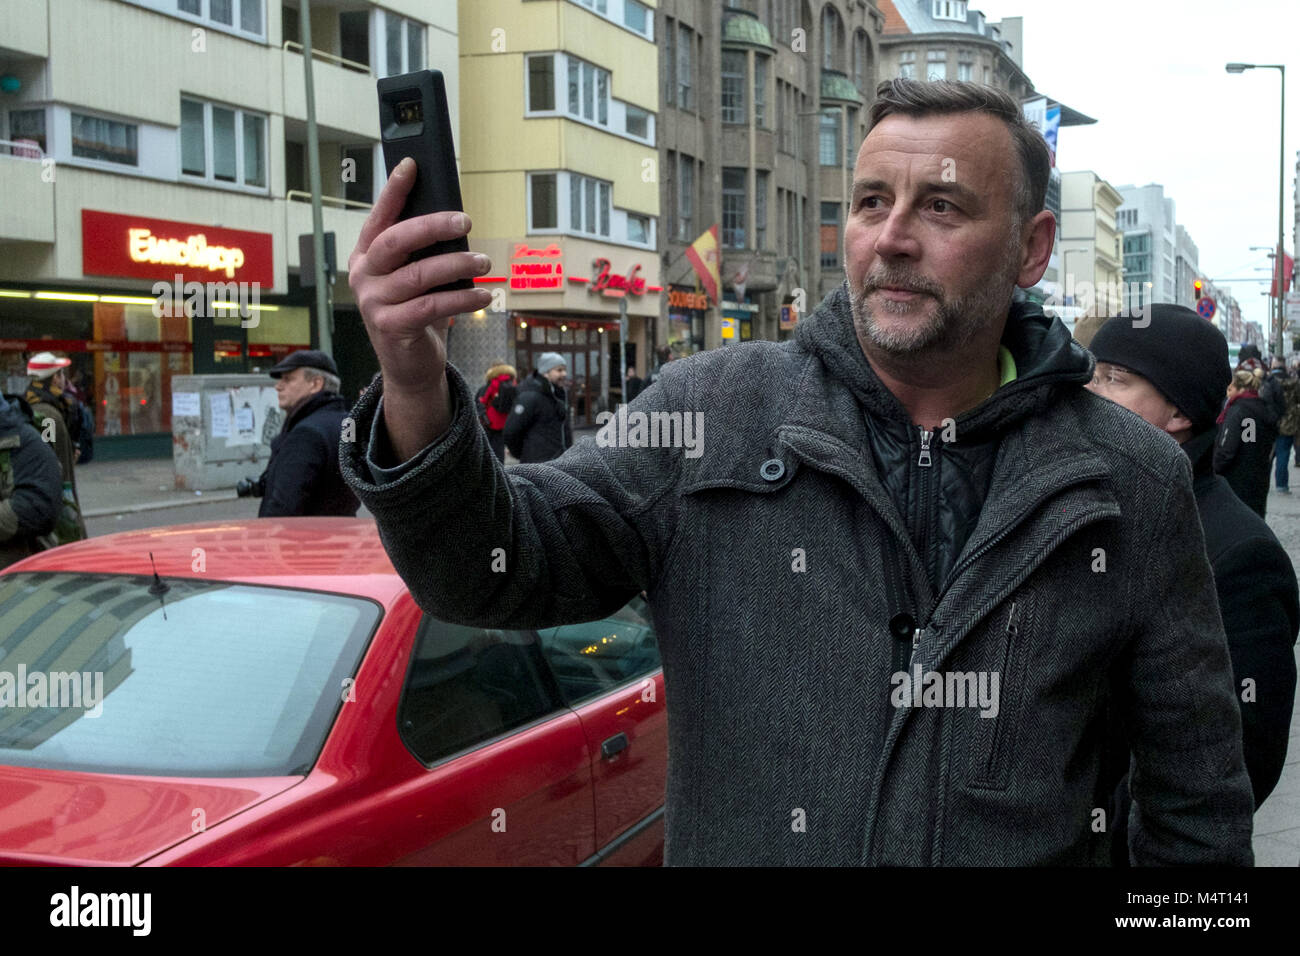 Berln, Germany. 17th Feb, 2018. Lutz Bachmann, founder of the anti-Islam movement 'Patriotische Europaeer gegen die Islamisierung Deutschlands' (lit. Patriotic Europeans Against the Islamisation of the West), films during a 'women's march' coming from the Alternative for Germany's (AfD) surrounding in Berln, Germany, 17 February 2018. More than 1000 people blocked the demonstration coming from the AfD background on Berlin's Friedrichstrasse. Credit: Stefan Jaitner/dpa/Alamy Live News Stock Photo